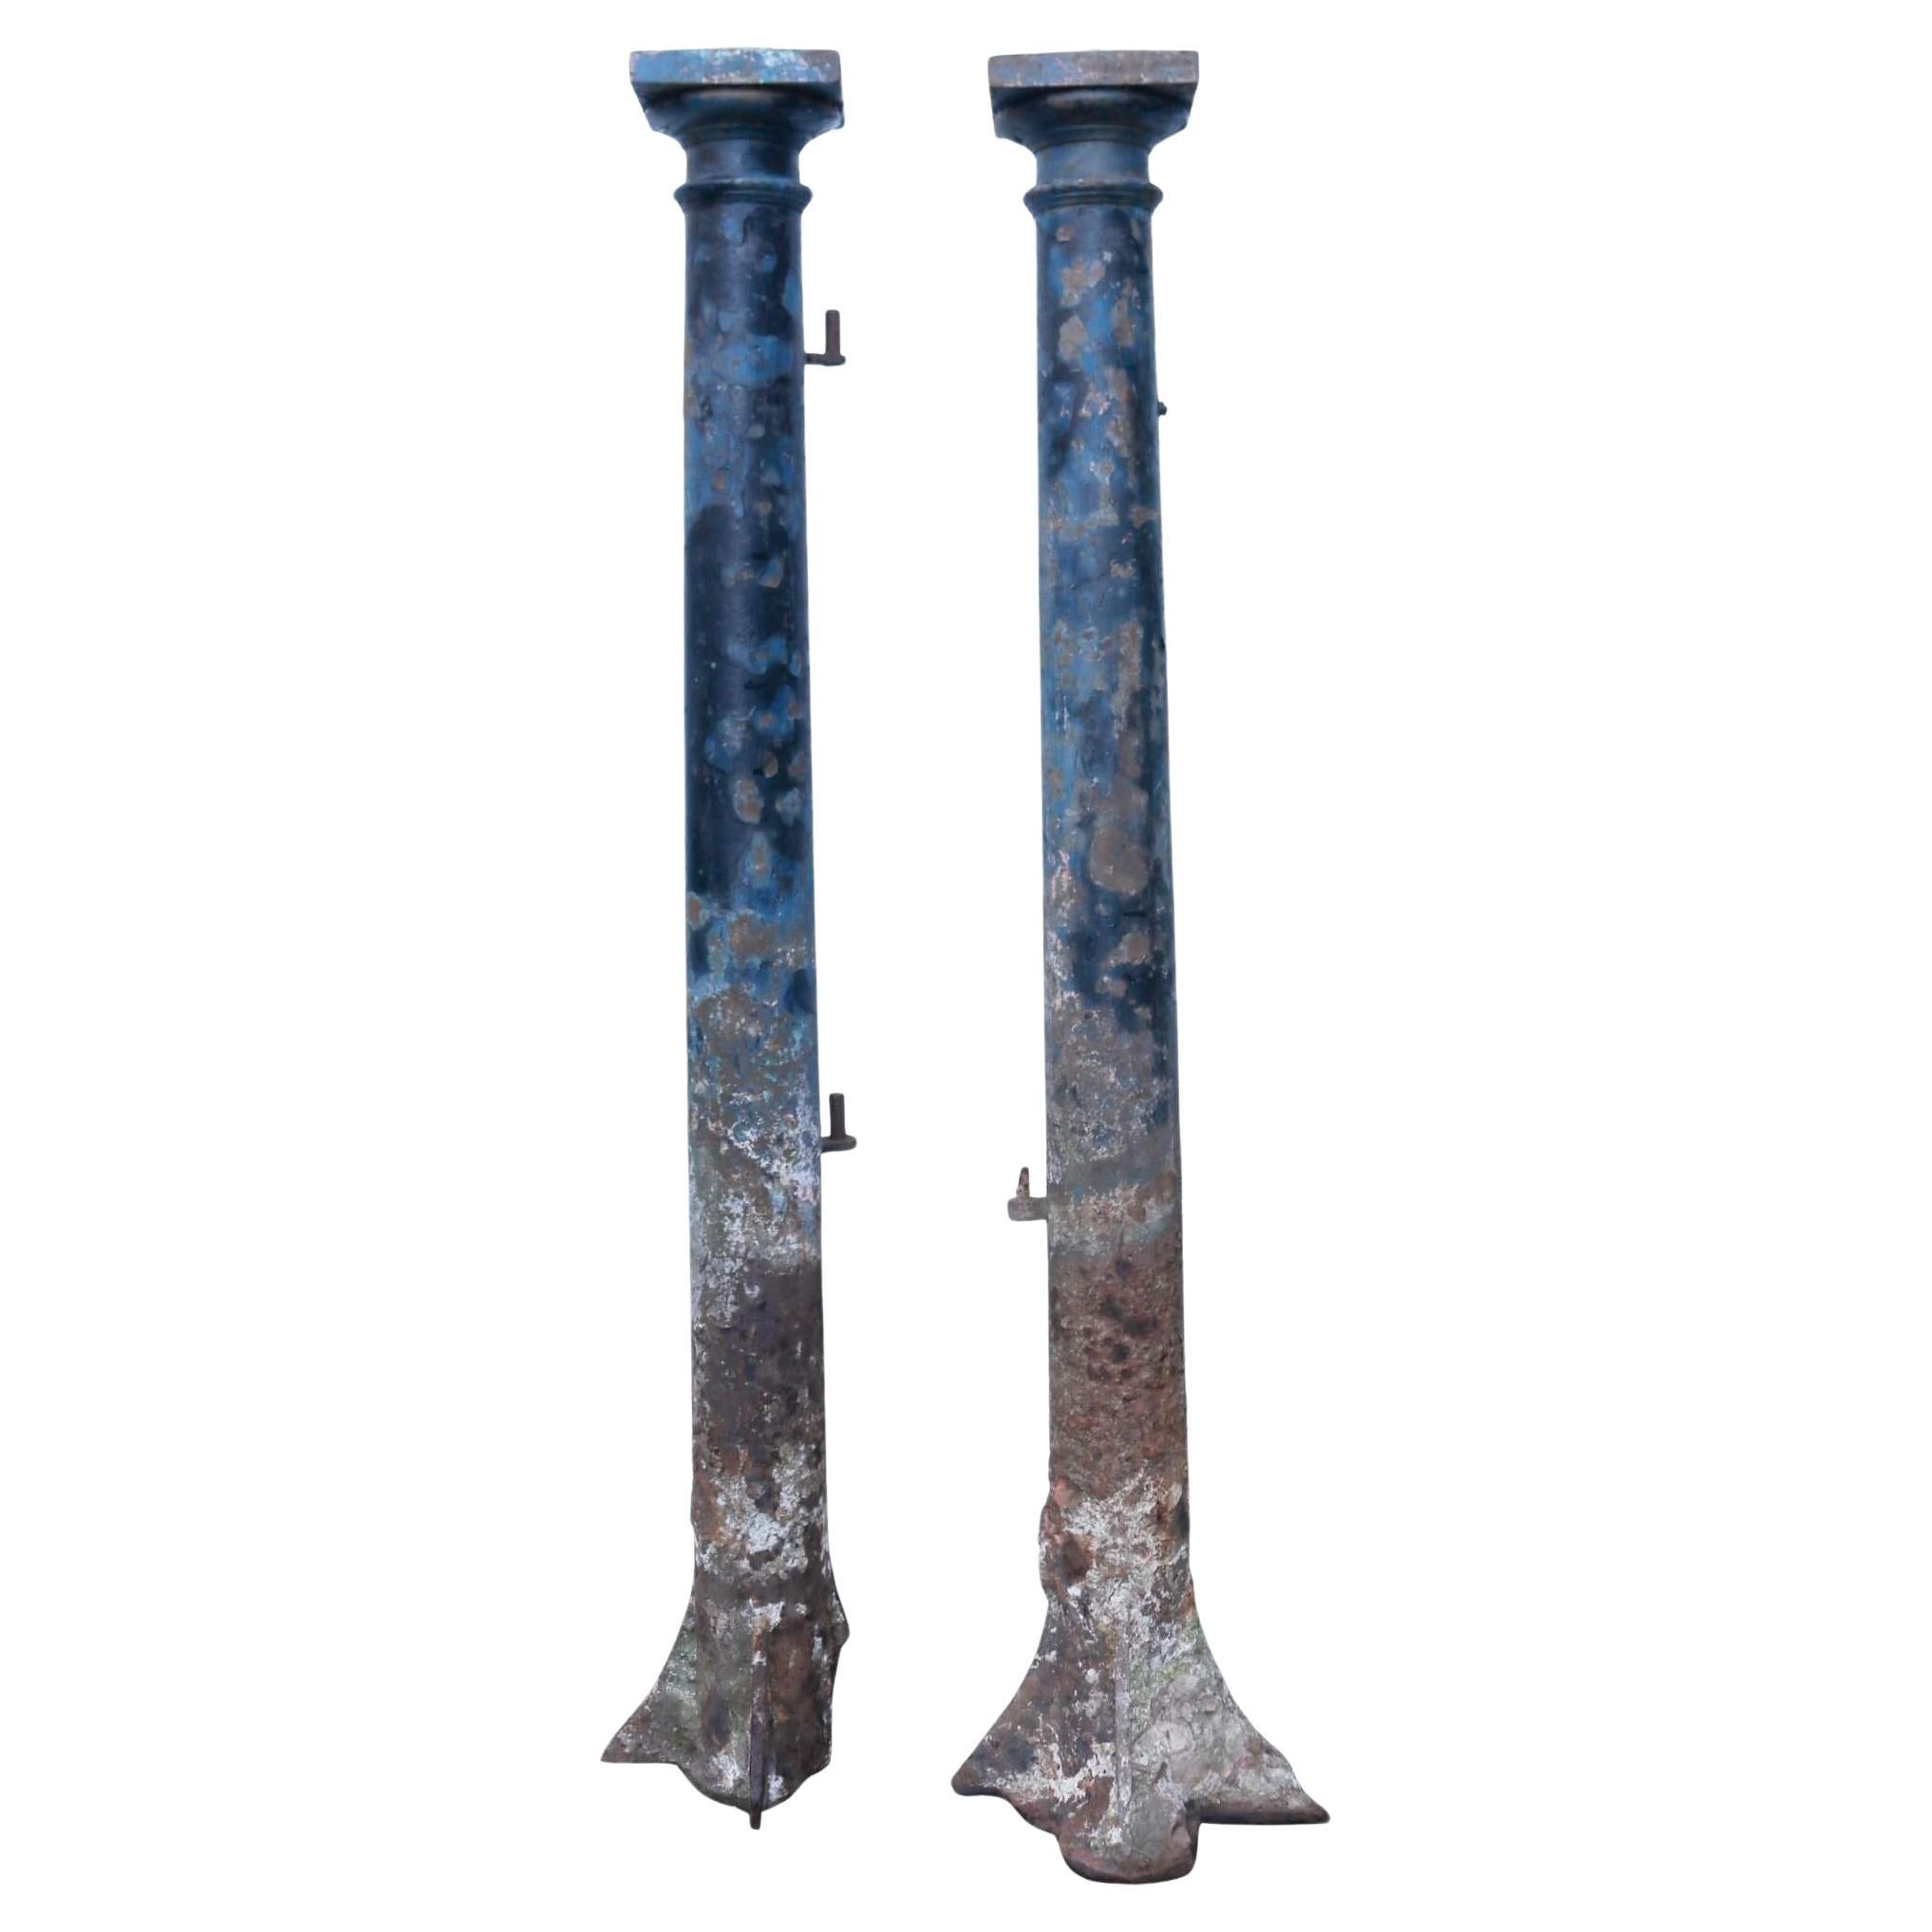 Antique Pair of Reclaimed Iron Gate Posts For Sale